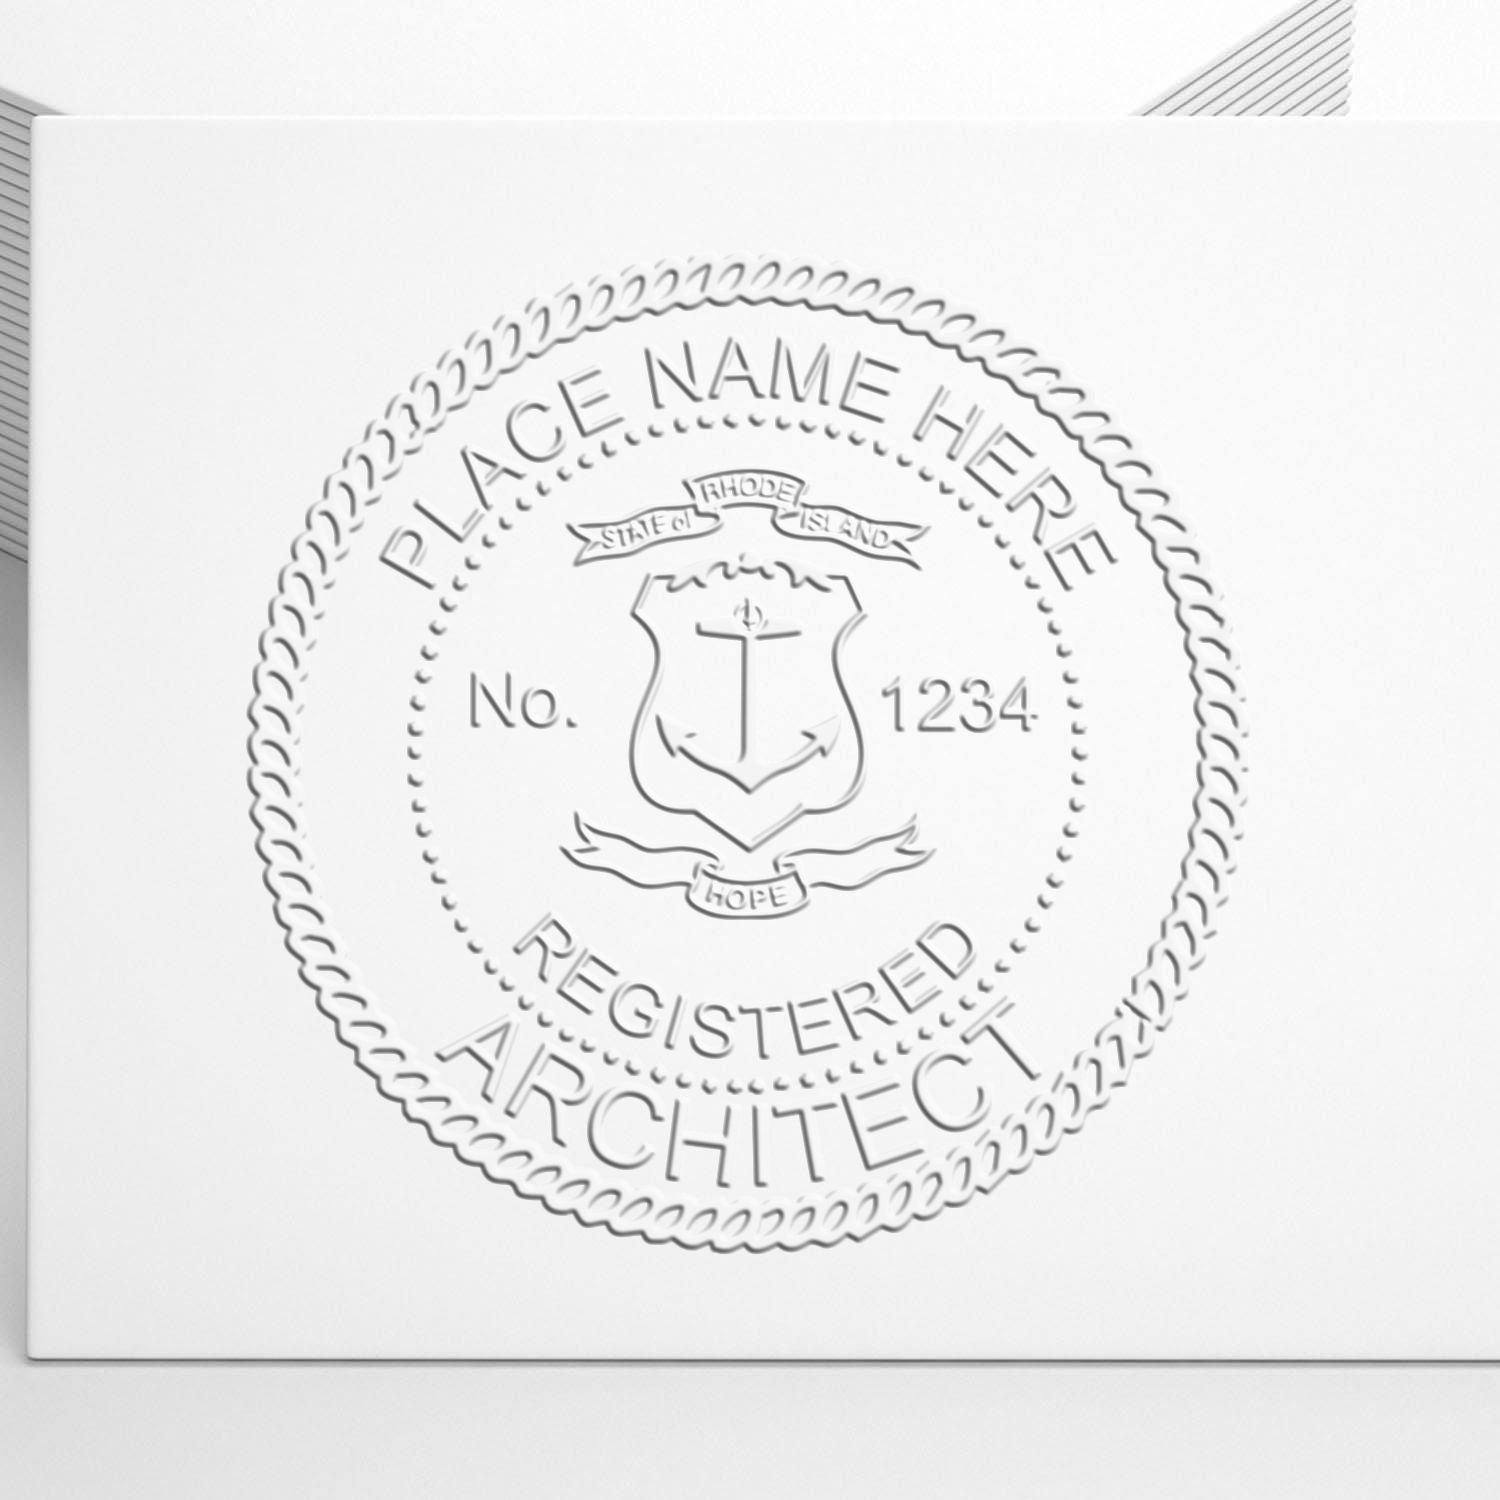 The State of Rhode Island Architectural Seal Embosser stamp impression comes to life with a crisp, detailed photo on paper - showcasing true professional quality.